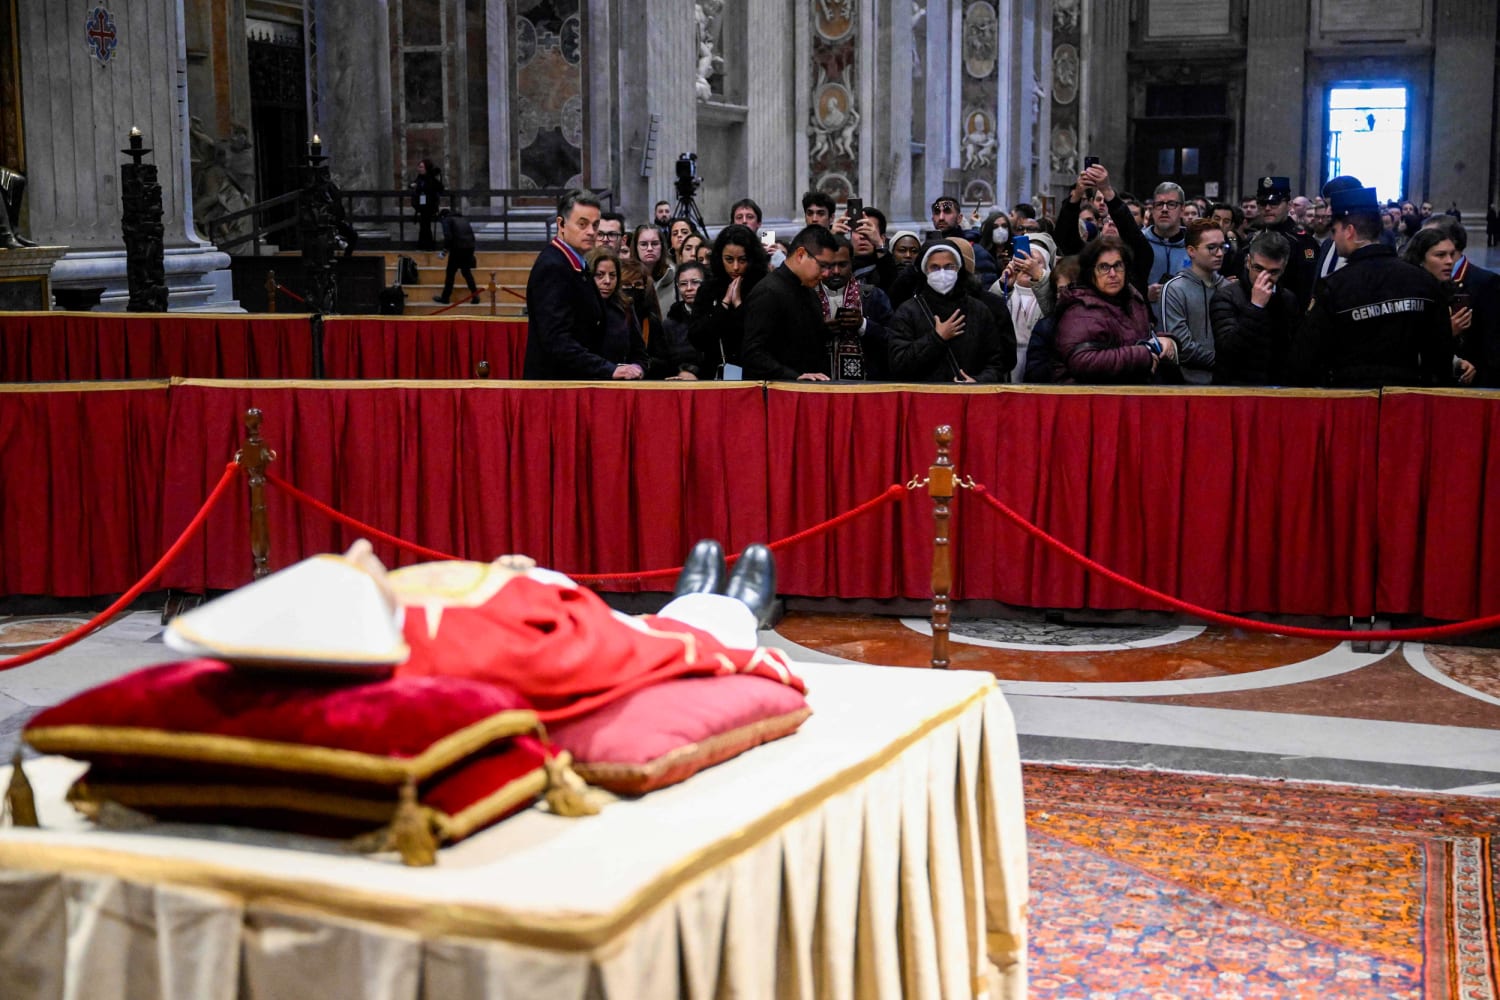 Thousands pay homage as Pope Emeritus Benedict XVI lies in